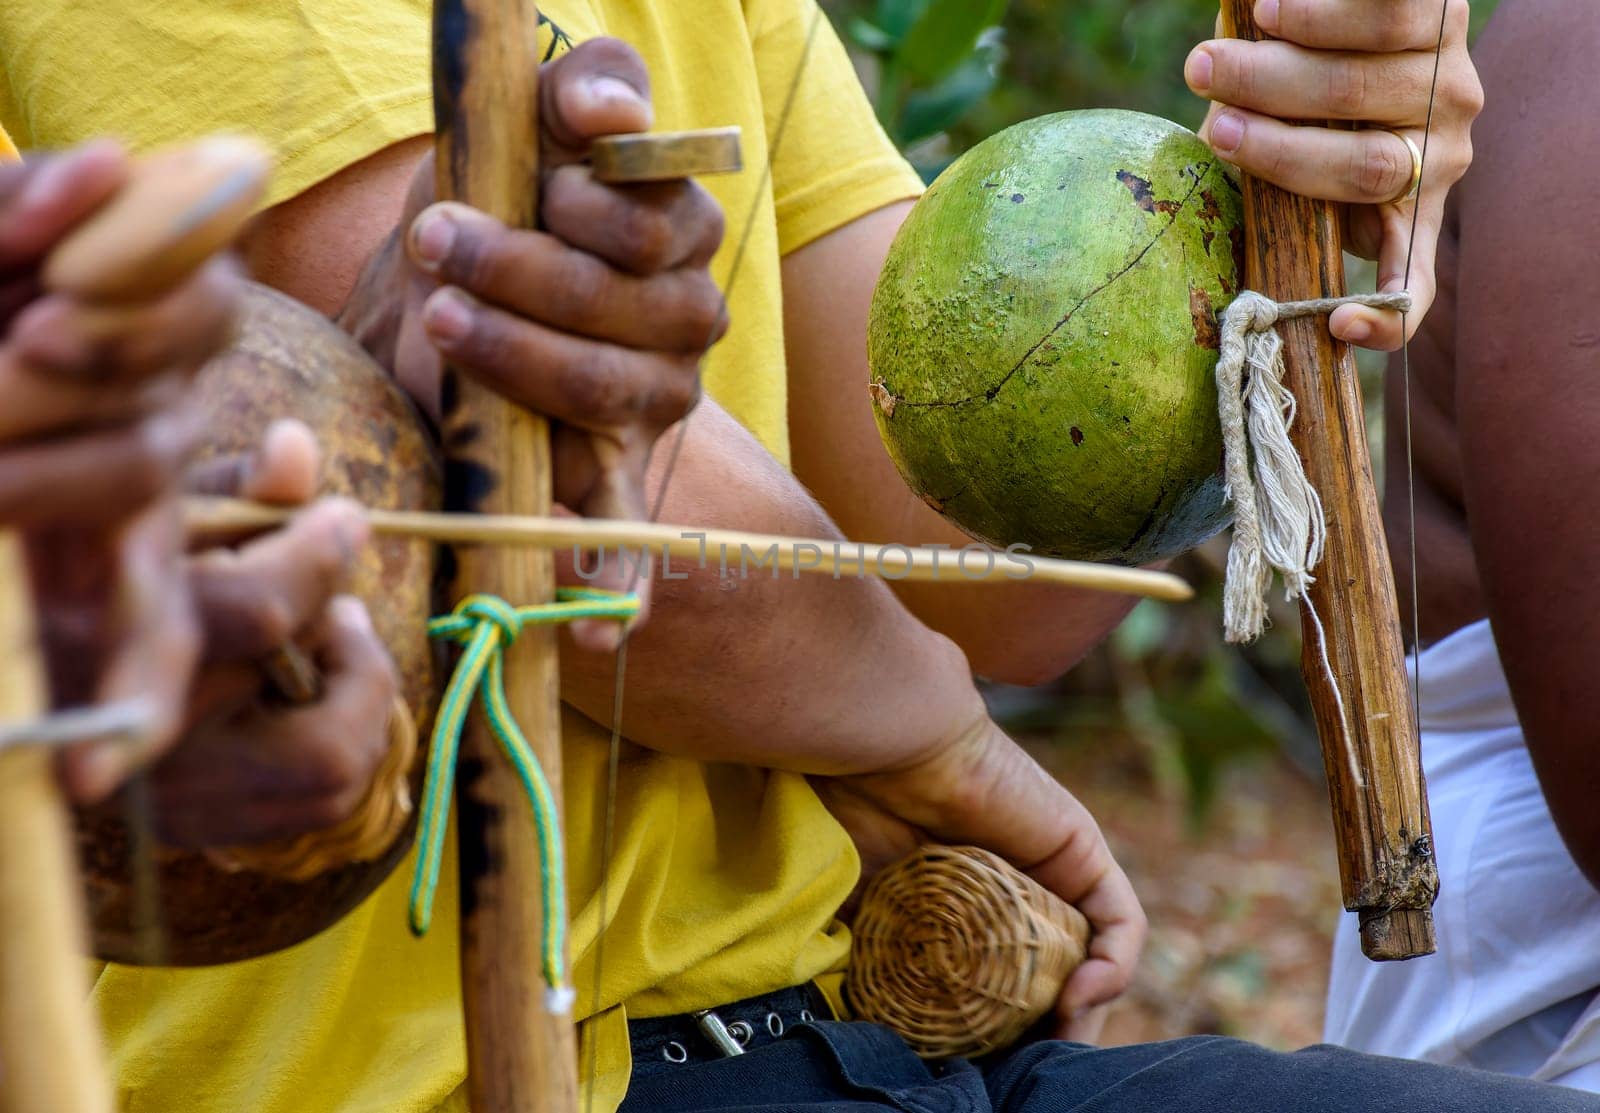 Musicians playing an instrument called berimbau by Fred_Pinheiro